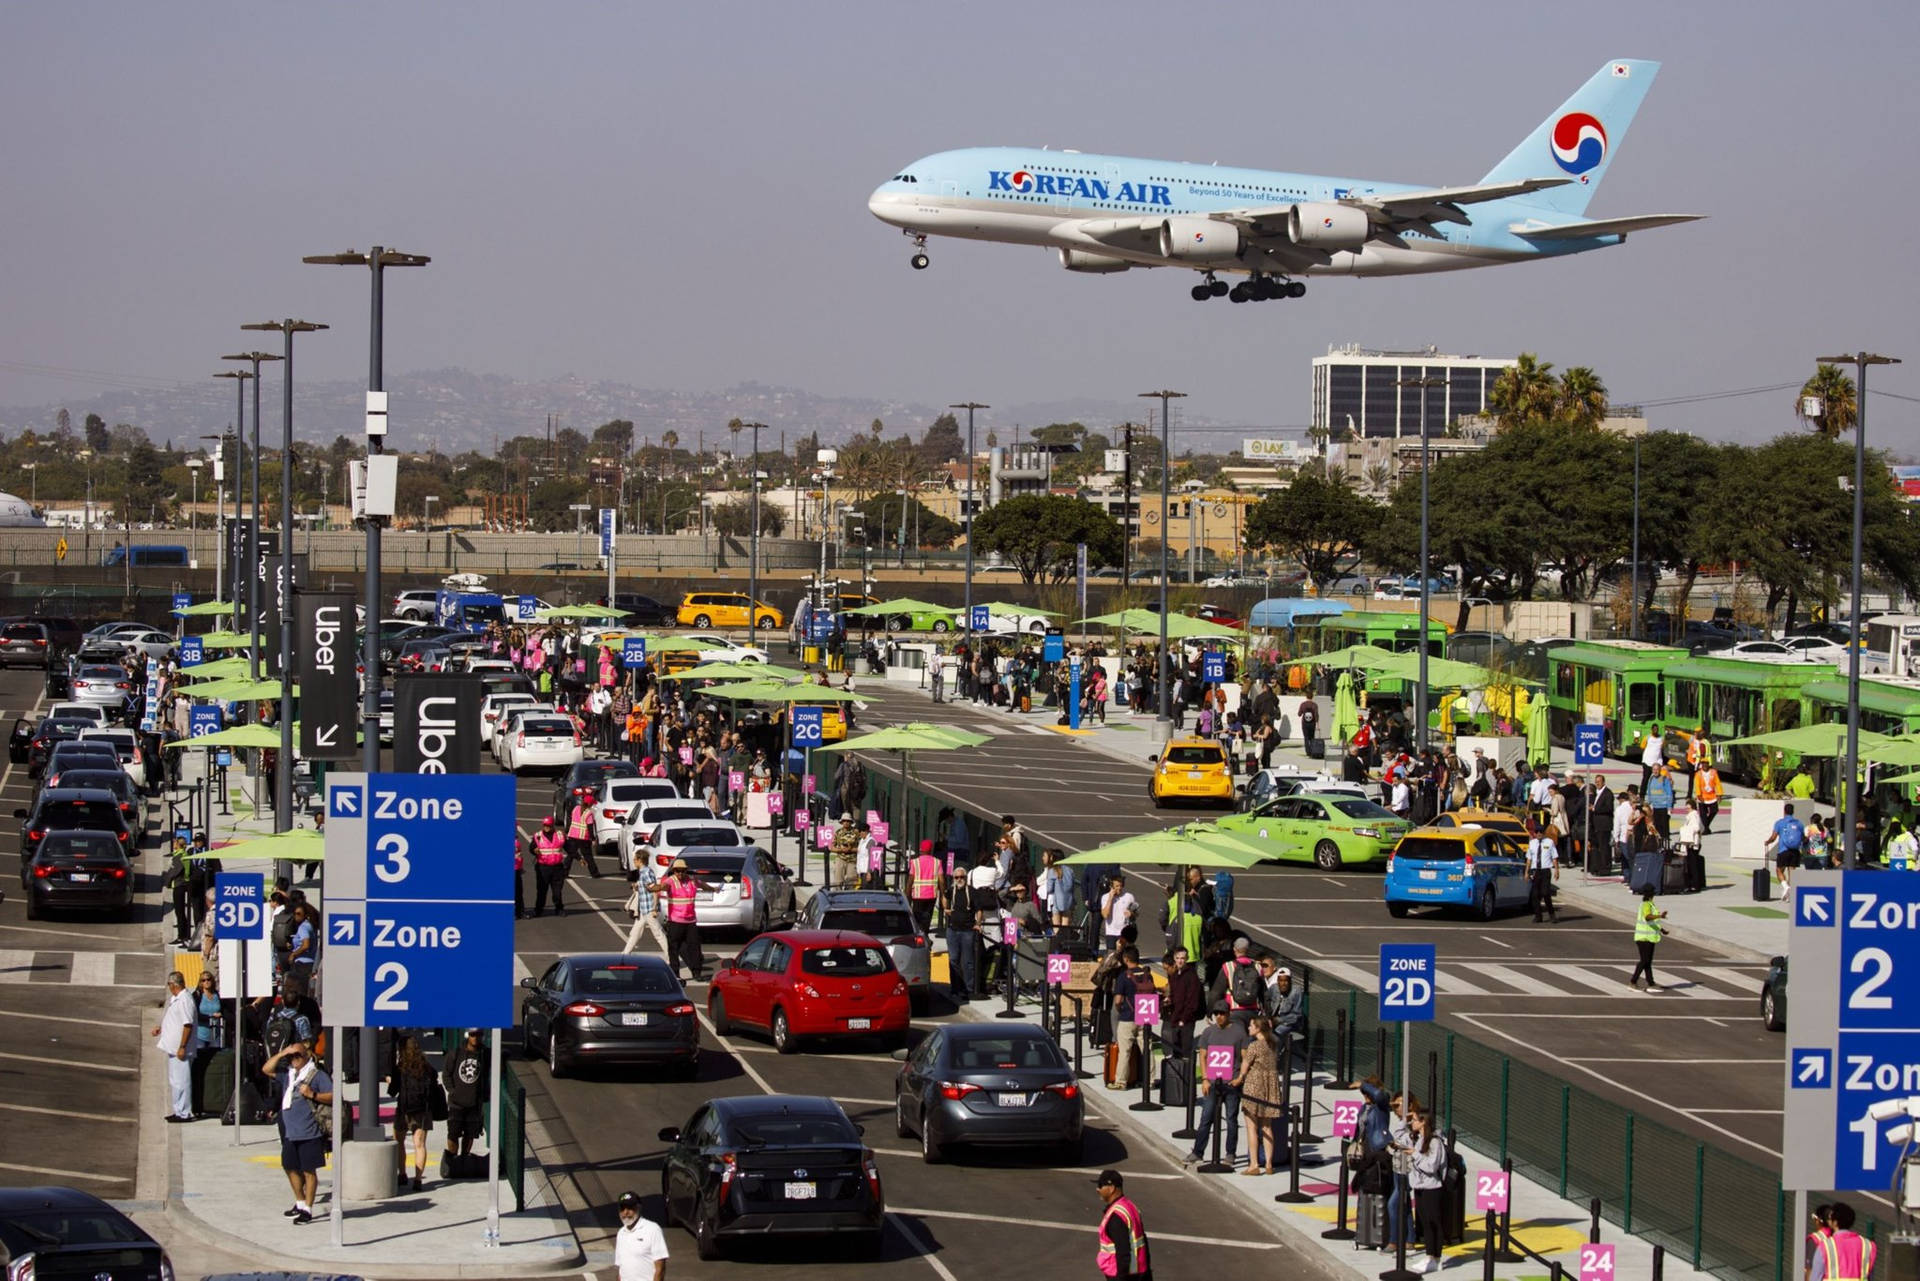 Experience the hustle and bustle of LAX airport on a busy day Wallpaper